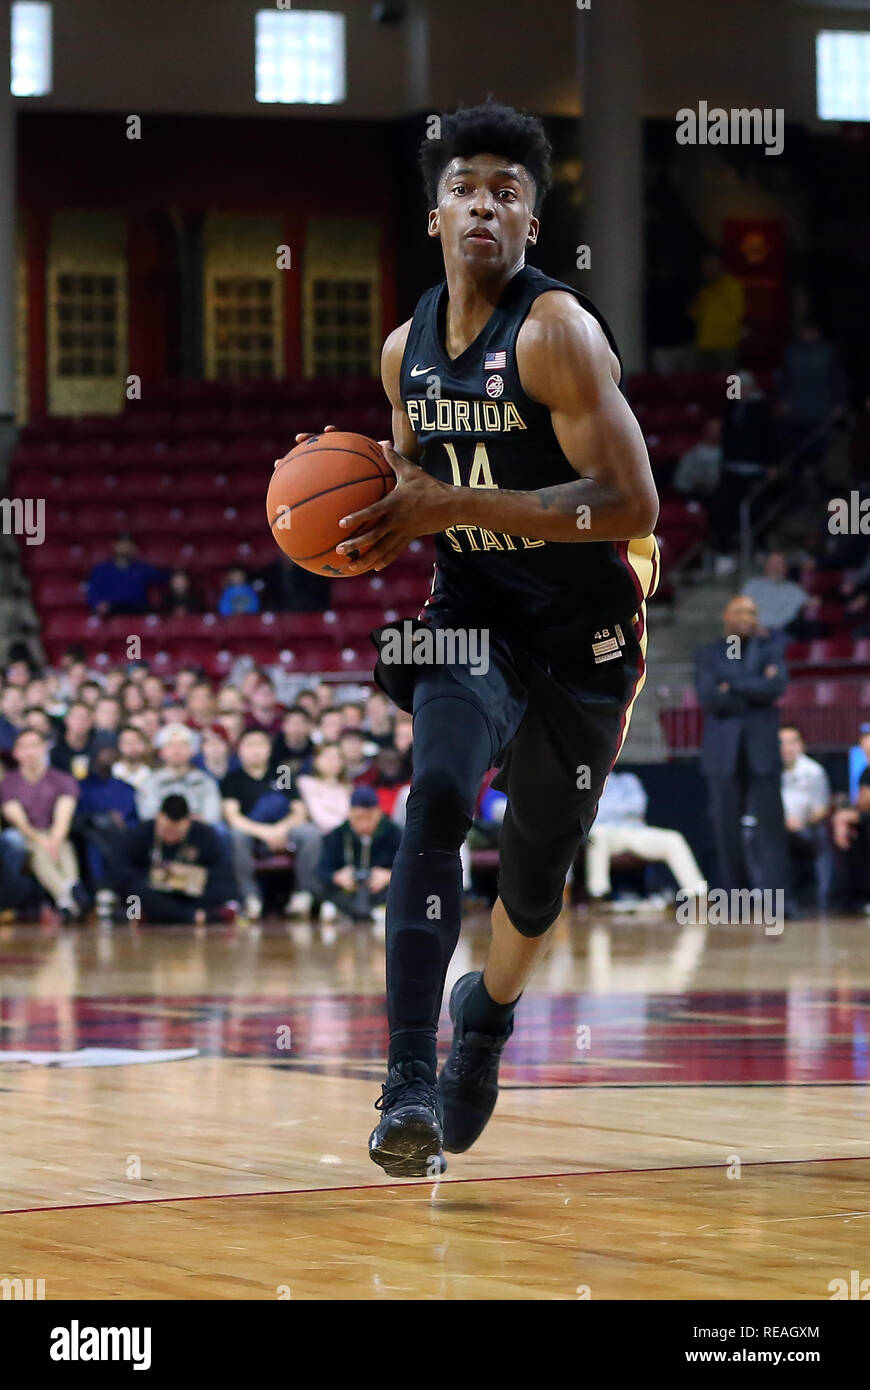 Conte Forum 20th Jan 2019 Ma Usa Florida State Seminoles Guard Terance Mann 14 With The Ball During The Ncaa Basketball Game Between Florida State Seminoles And Boston College Eagles At Conte